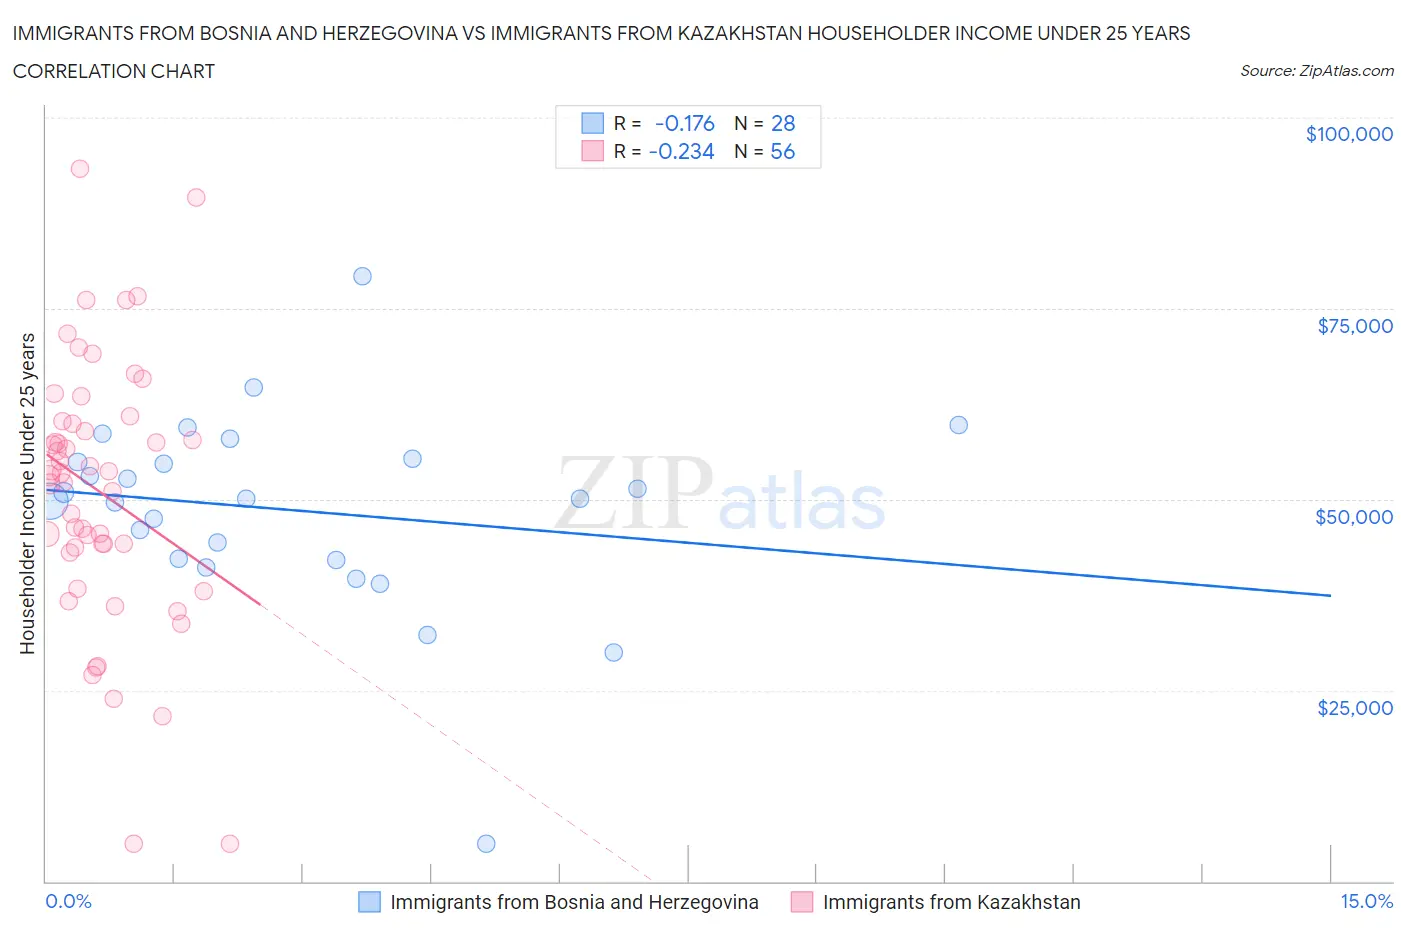 Immigrants from Bosnia and Herzegovina vs Immigrants from Kazakhstan Householder Income Under 25 years